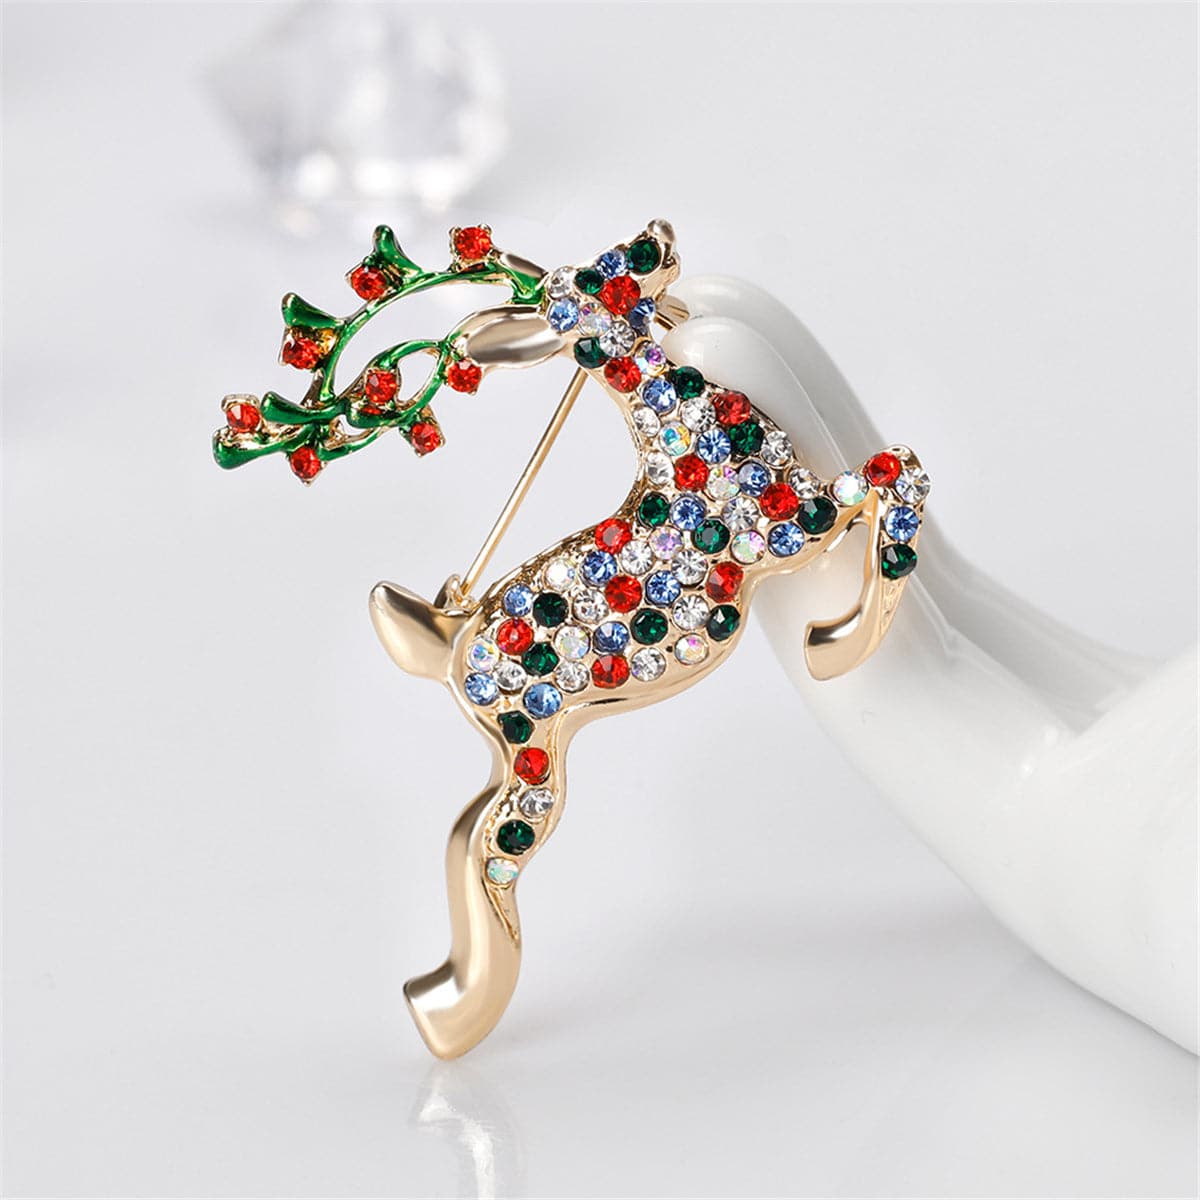 Cubic Zirconia & 18K Gold-Plated Jumping Reindeer Brooch